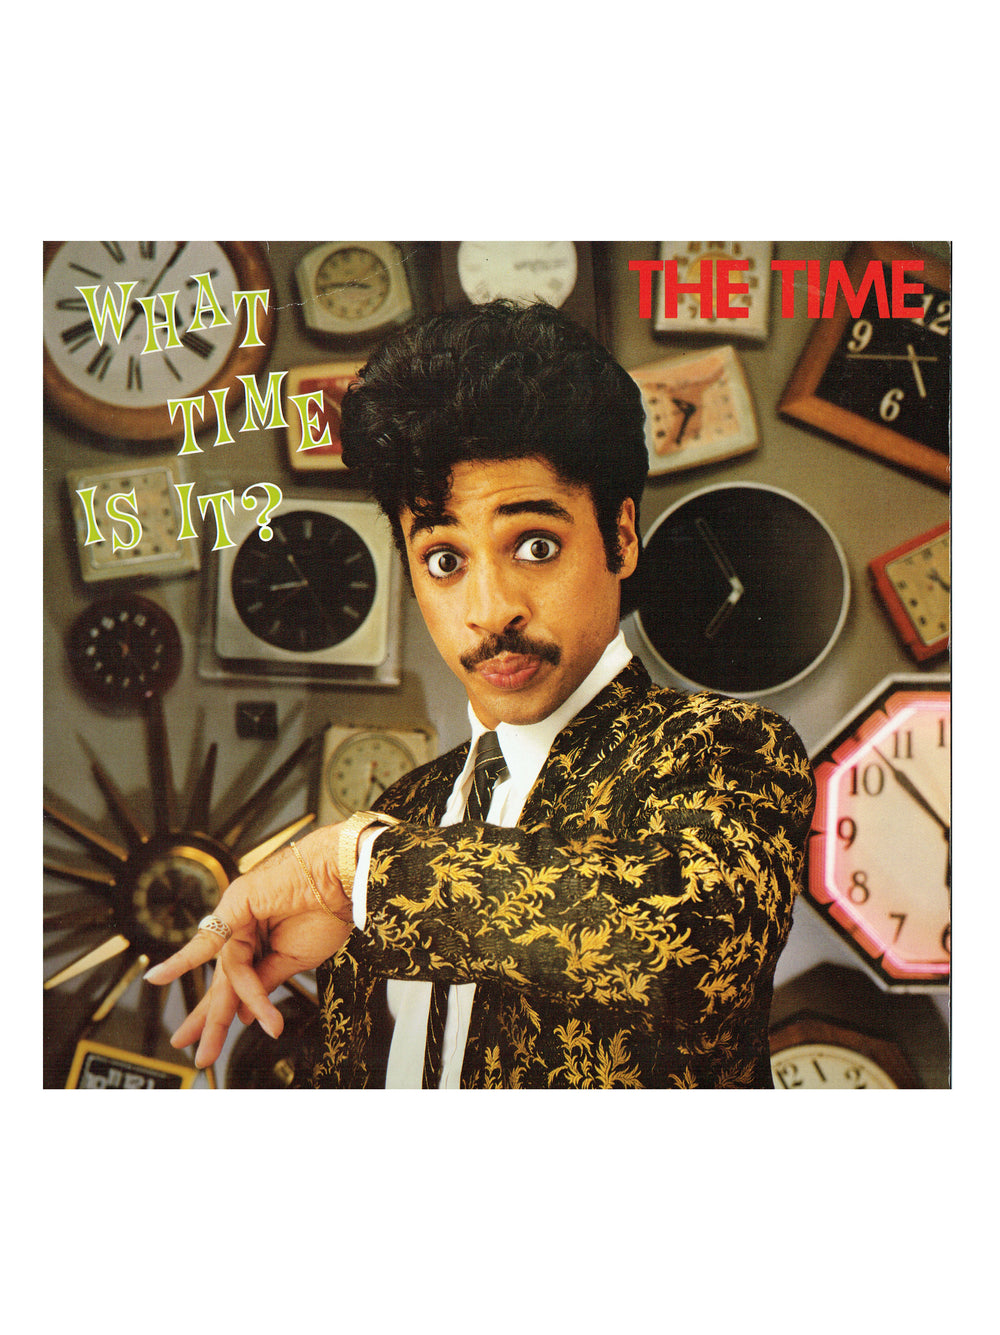 Prince – The Time What Time Is It? Vinyl LP Album Germany Preloved: 1982